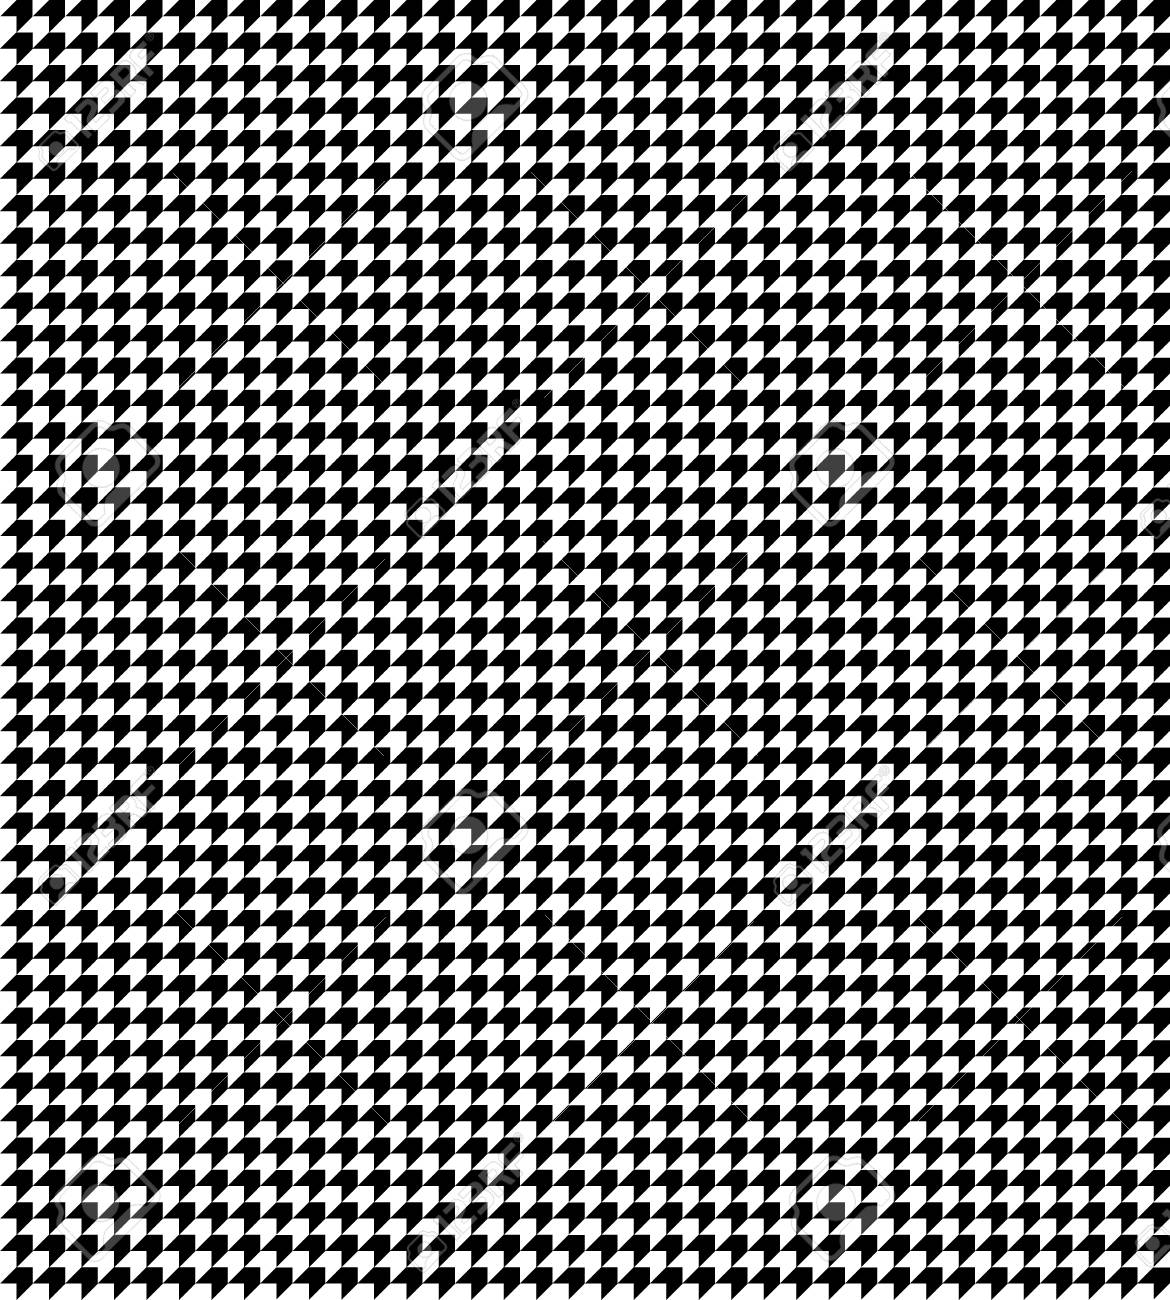 Abstract Geometric Background Black And White Houndstooth Pattern